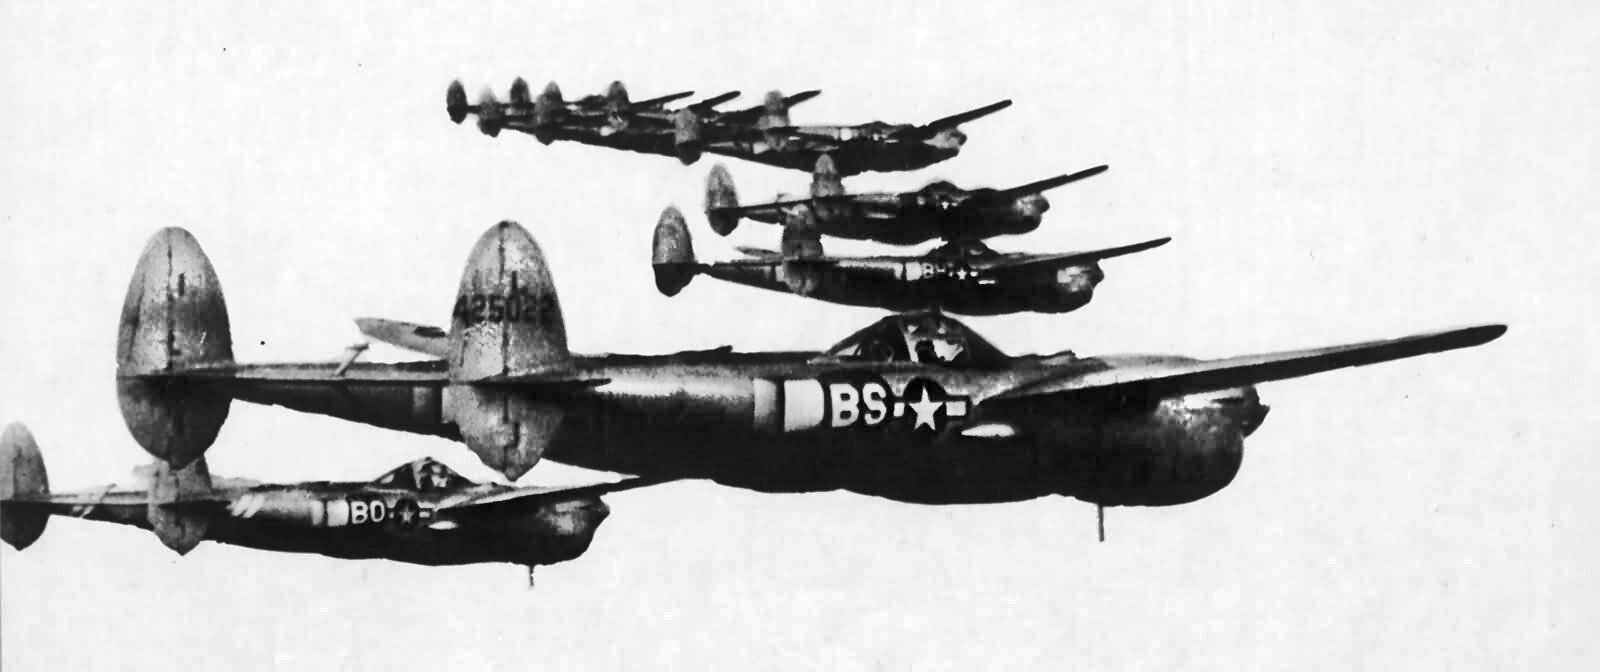  These P-38 Lightning fighters of the 96th Fighter Squadron were a component of the Fifteenth Air Force based in Italy. Shown in flight during a 1944 mission, these Lightnings are examples of the ‘L’ variant, which included tail-warning radar.